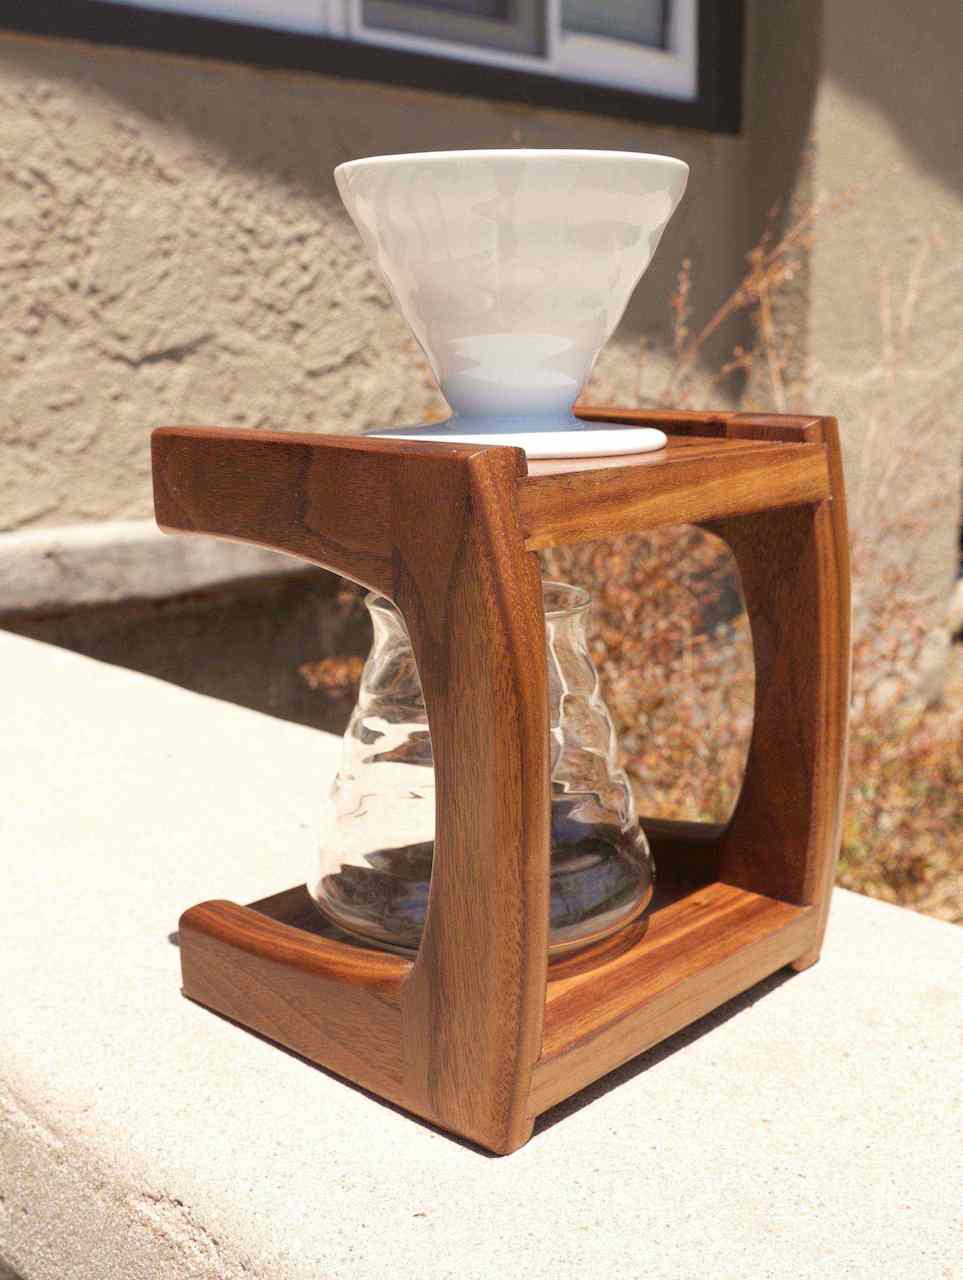 DIY Pour-Over Coffee Stand - The Merrythought